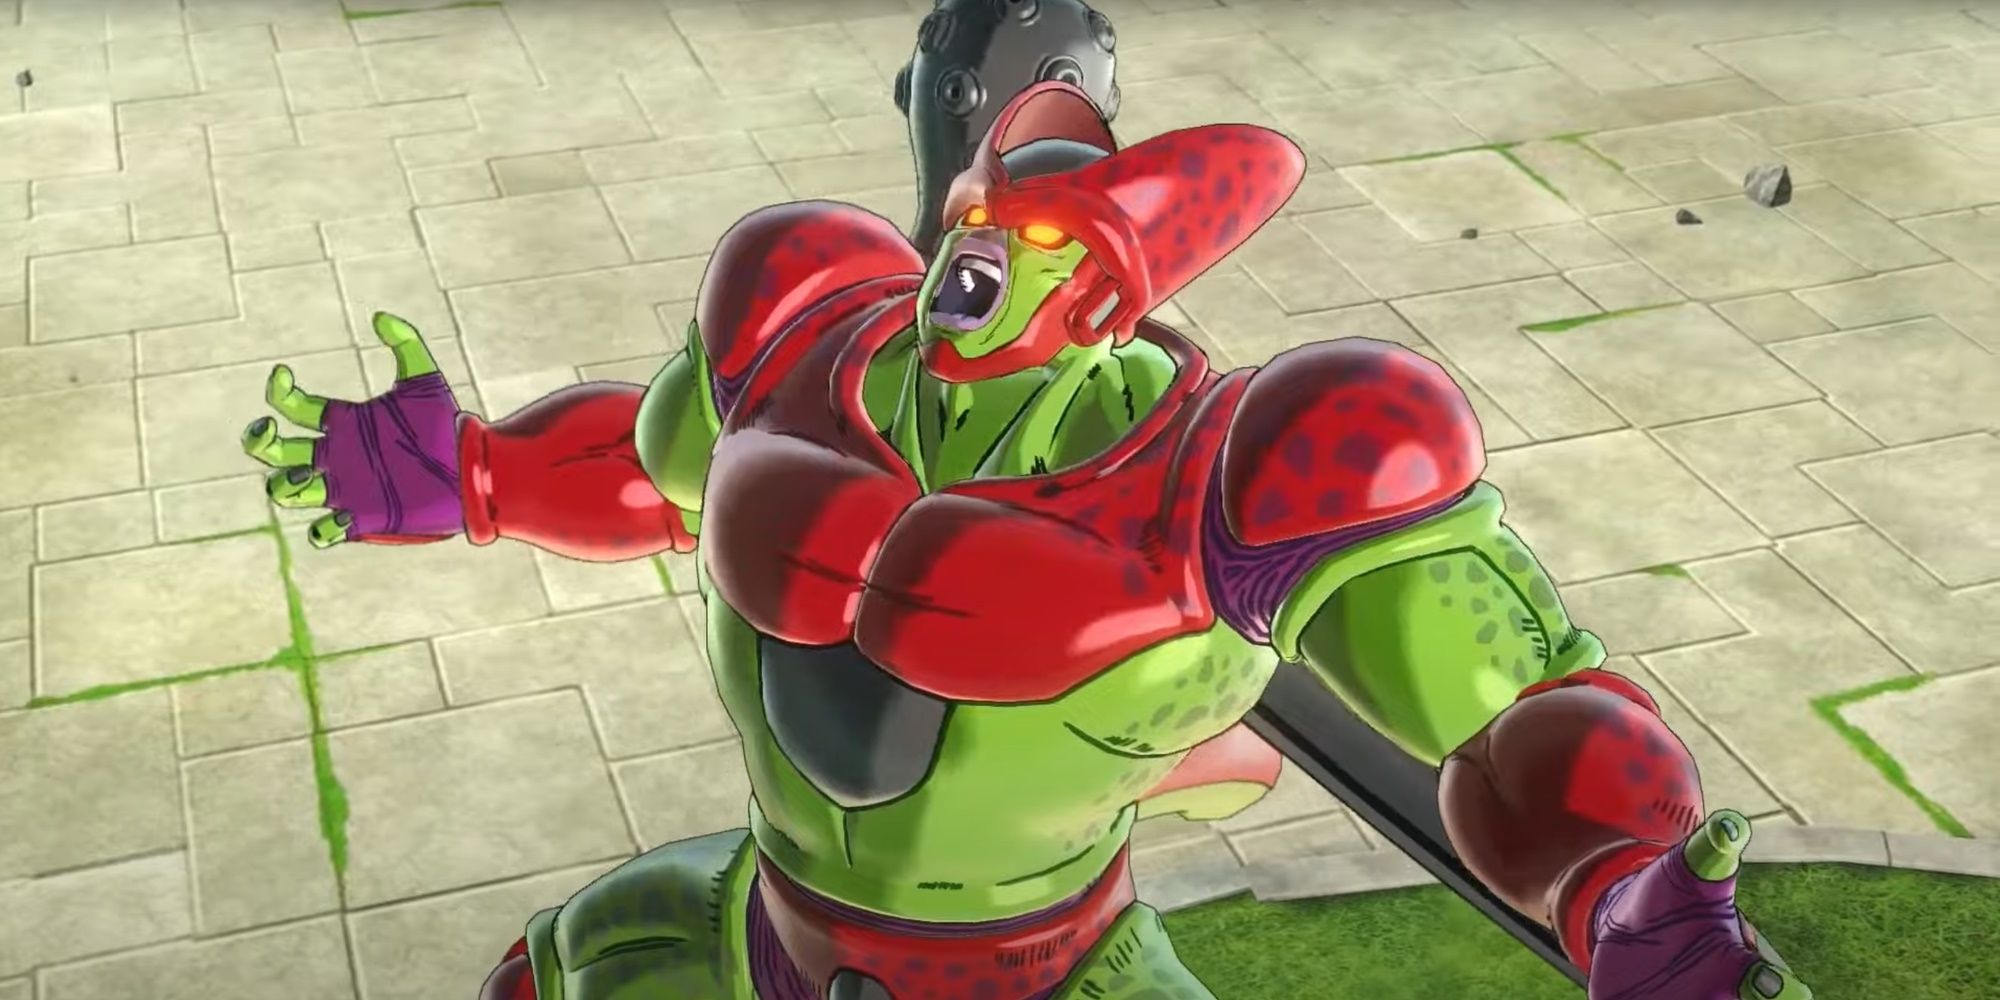 Dragon Ball Xenoverse 2 Getting Orange Piccolo In New Hero Of Justice Pack DLC